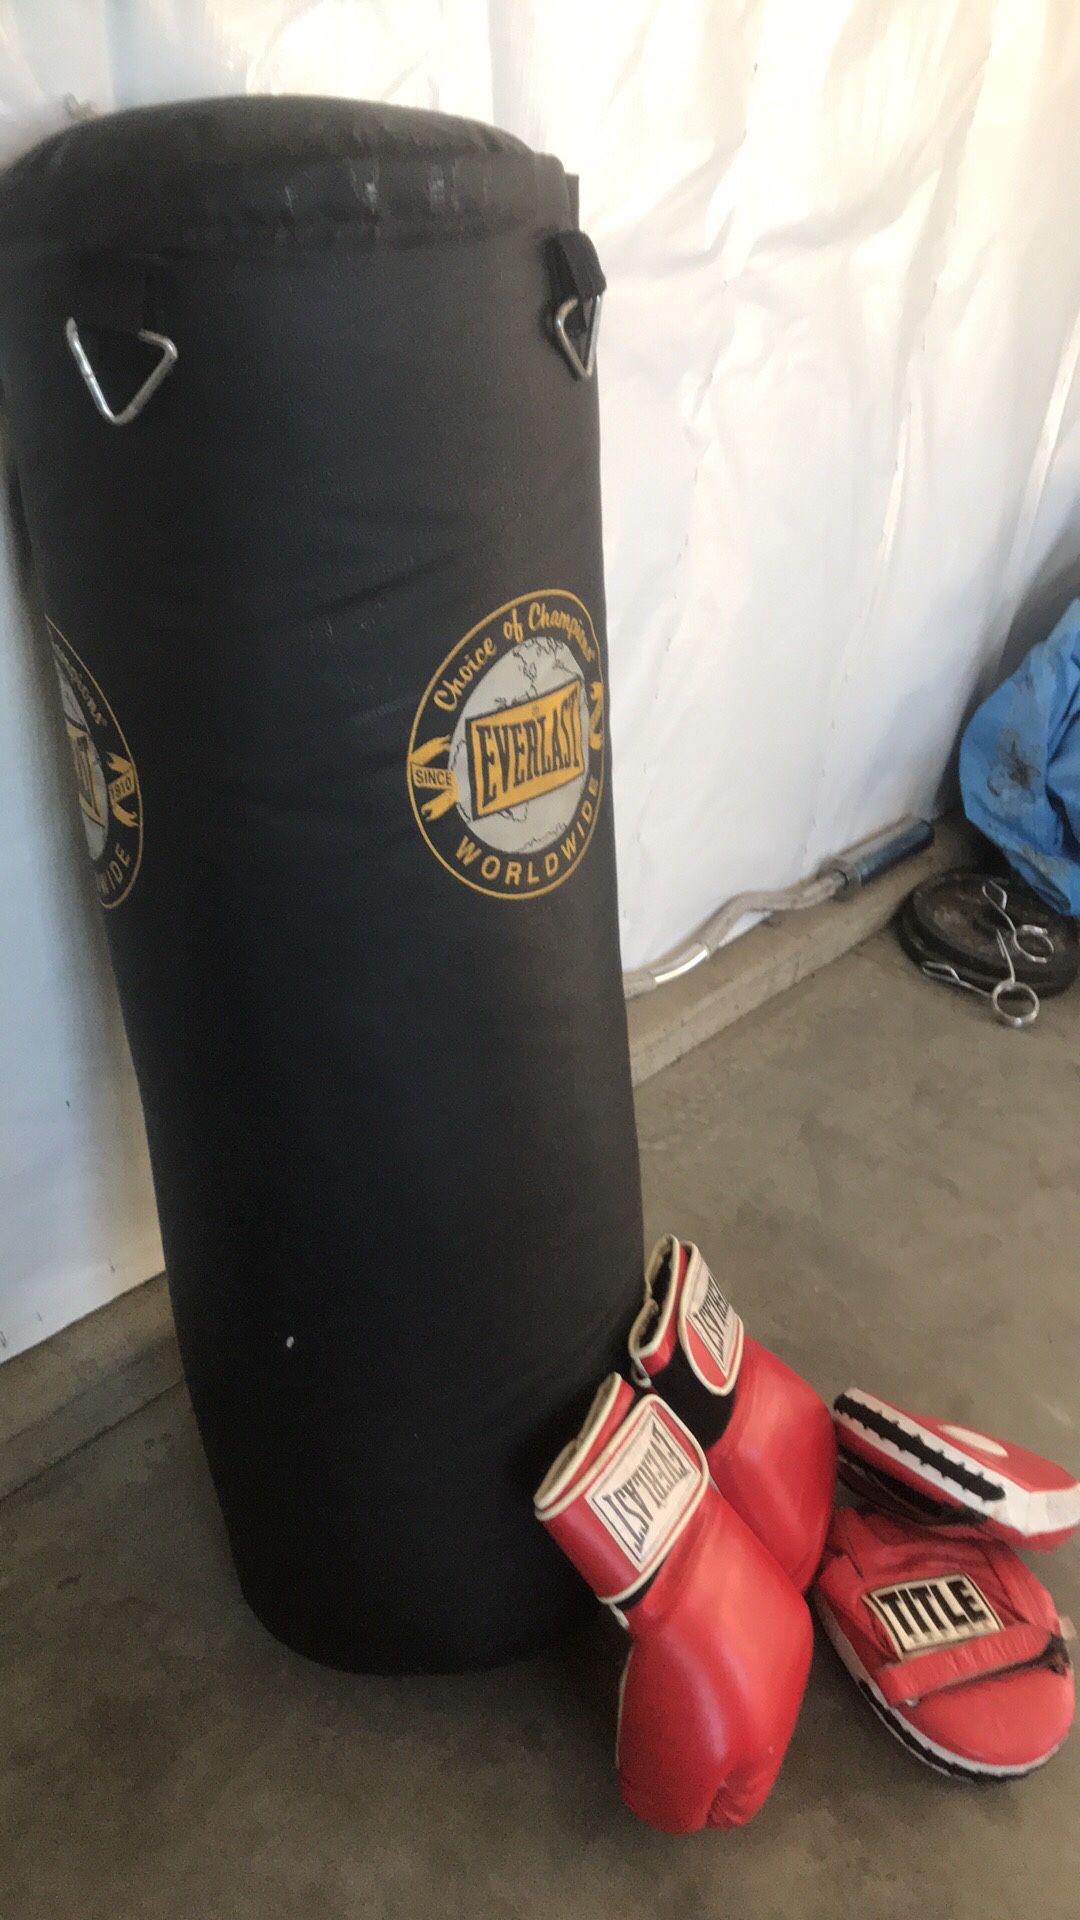 Everlast Heavy bag, focus mitts and gloves